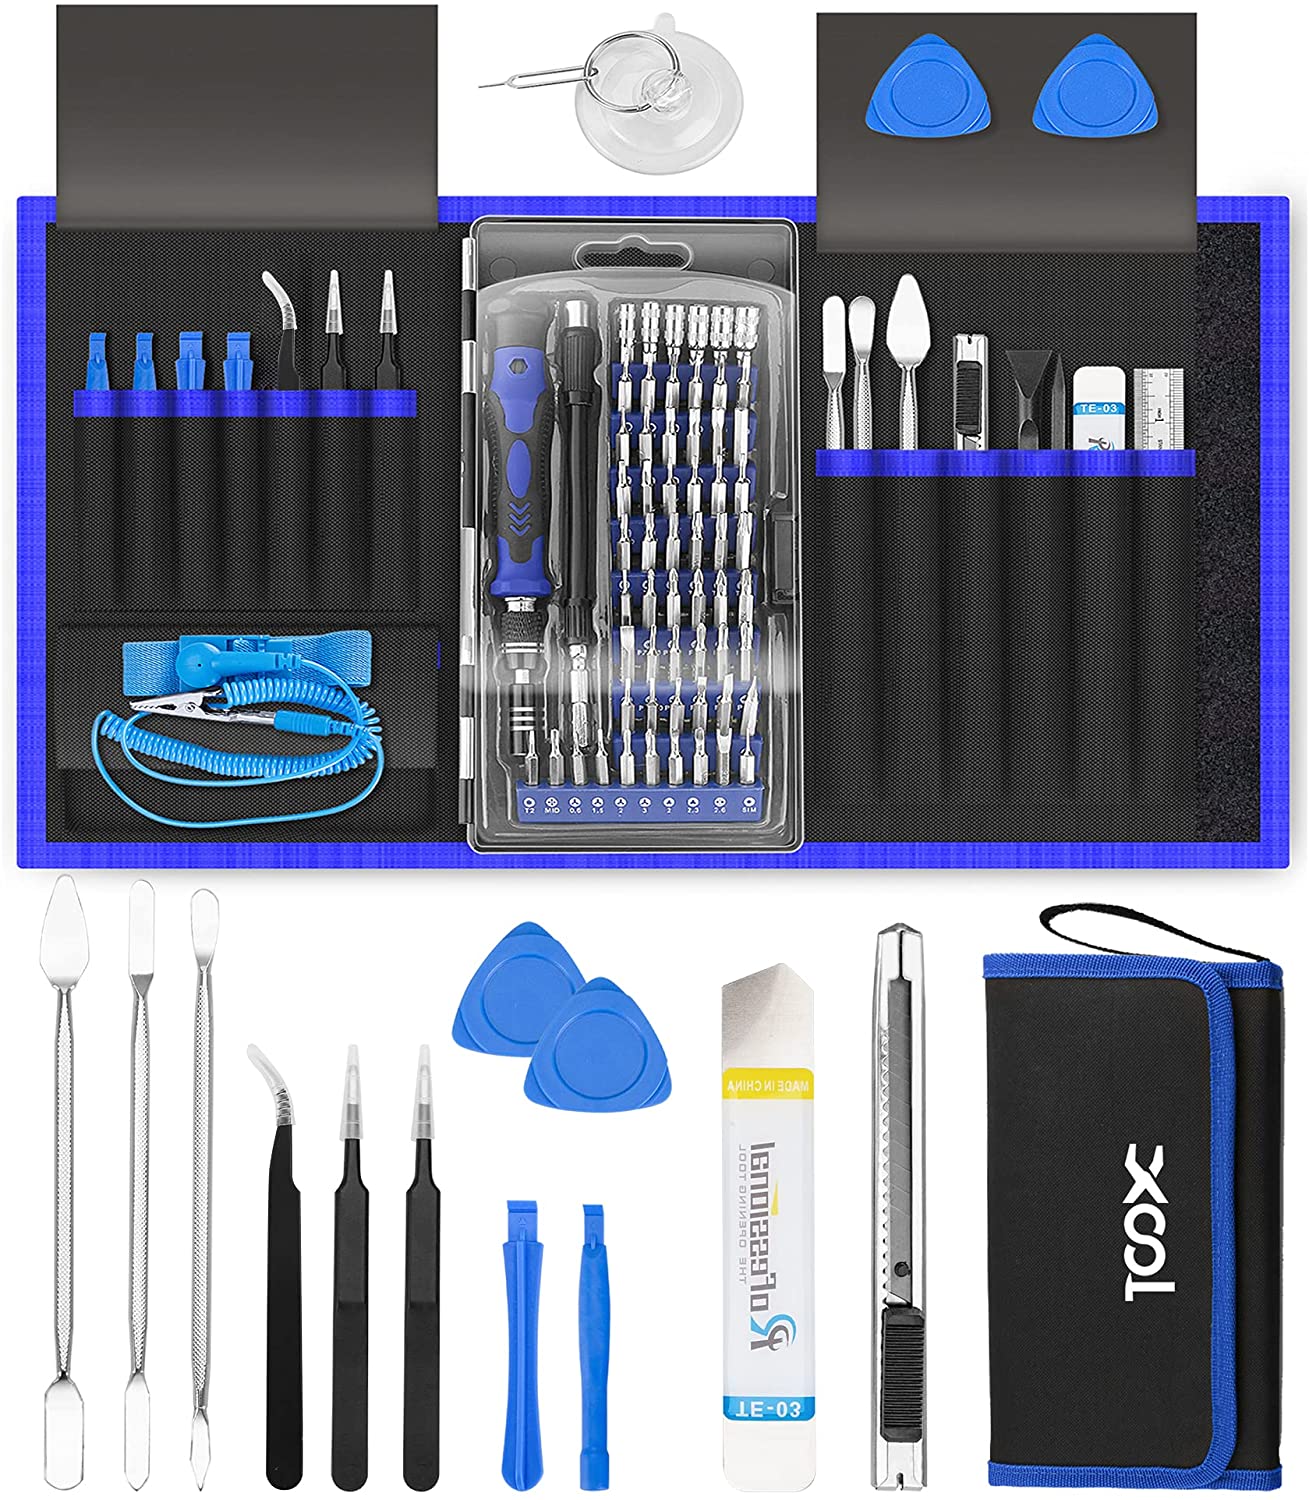 Precision Screwdriver Kit, XOOL 80 in 1 Professional Electronics Repair Tool Magnetic Driver Kit with Flexible Shaft